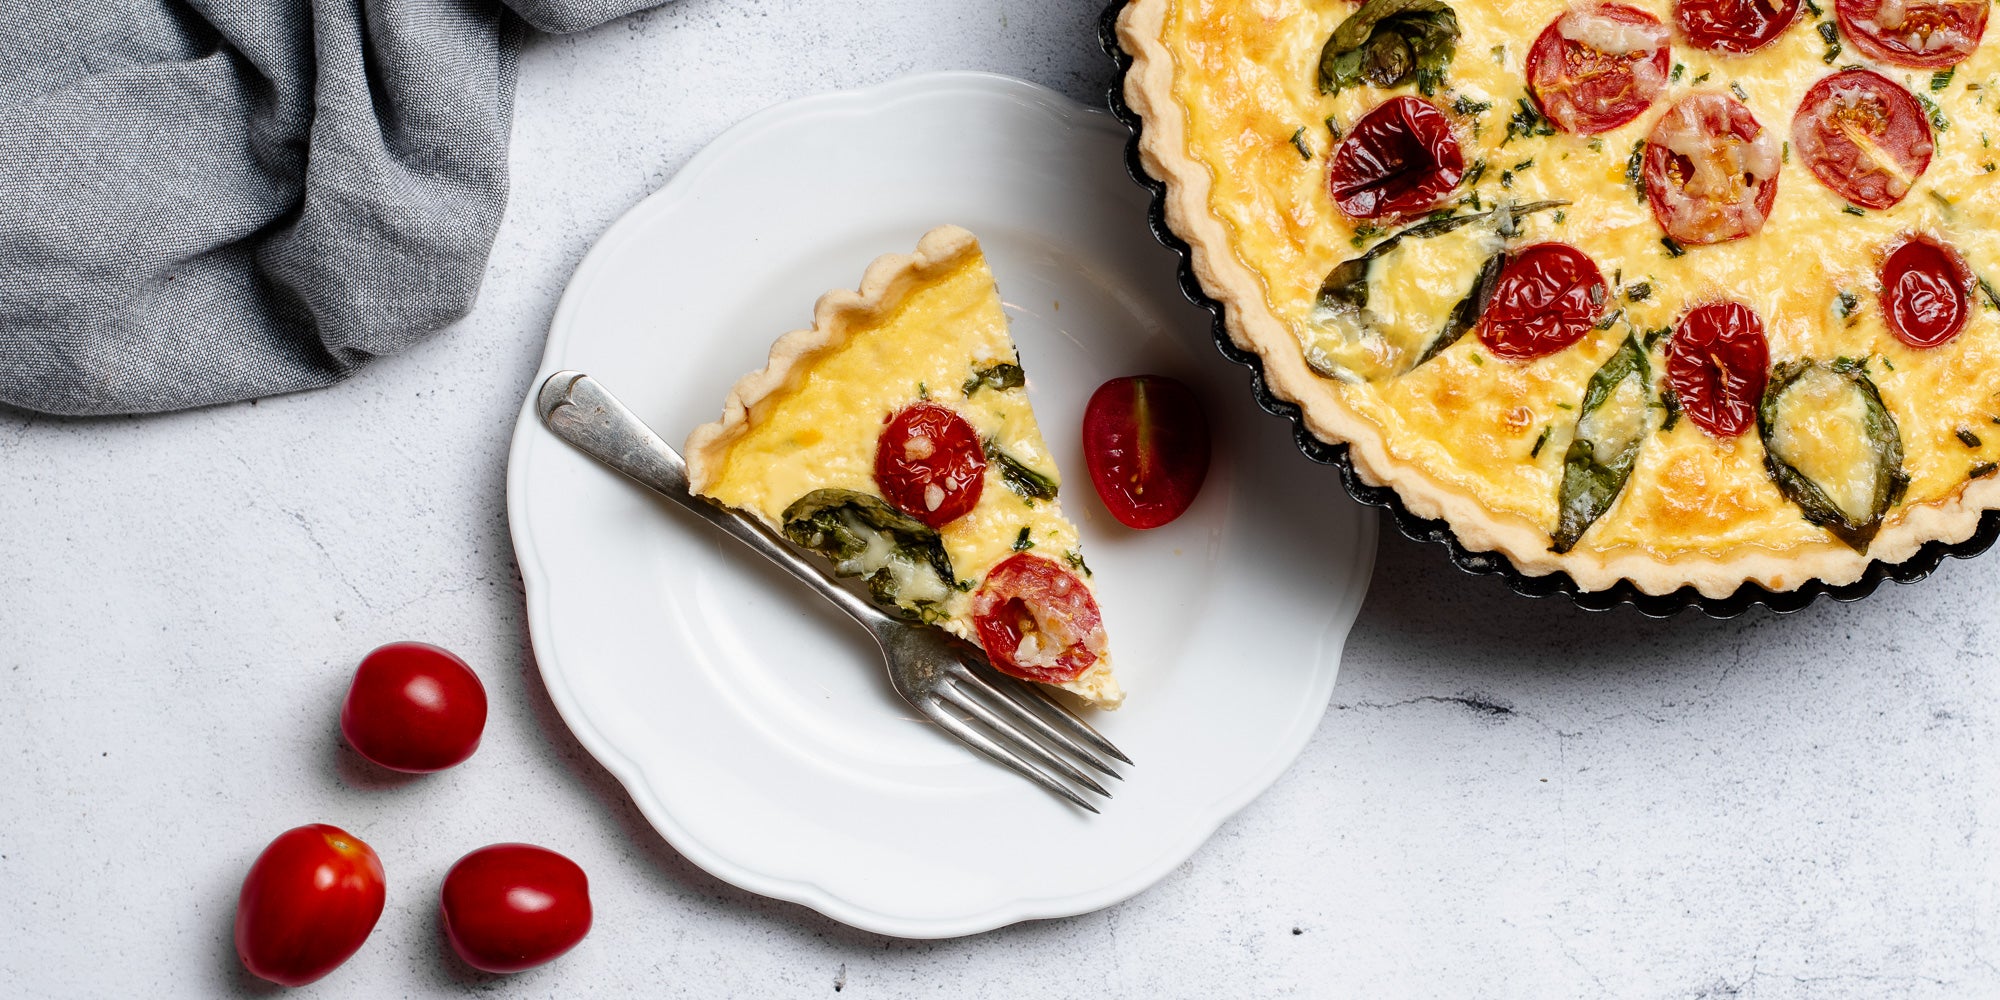 Cheese & Tomato Quiche with a slice on a plate with a fork, next to some chopped tomatoes